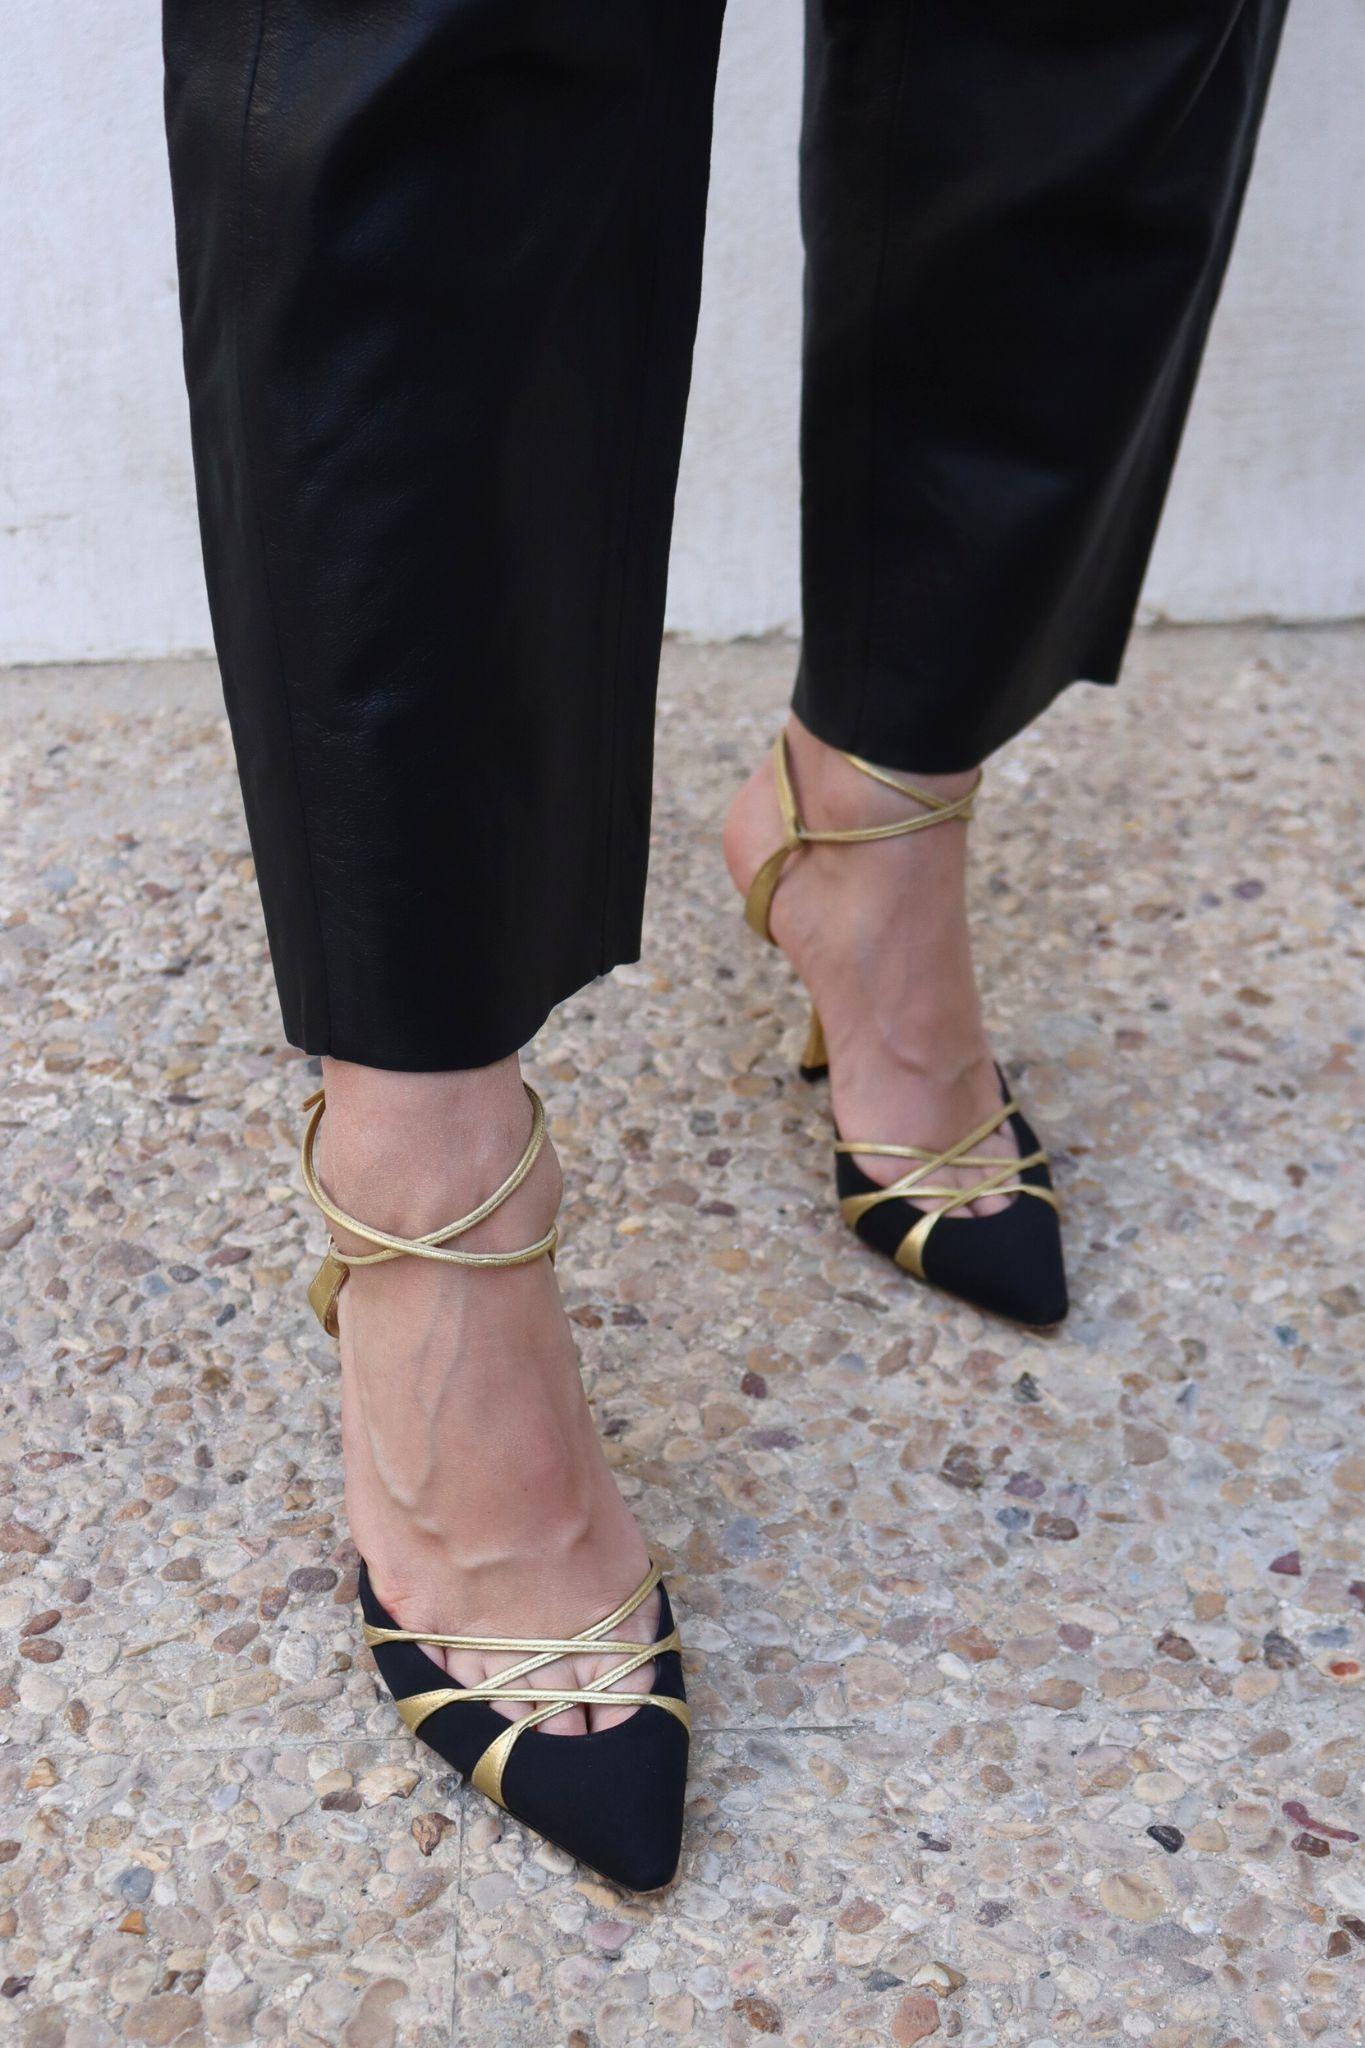 Manolo Blahnik Satin Accent Strappy Sling-back Pumps, Features Pointed-Toes, Stiletto Heels, Wrap-Around Straps  and Tie Closures.

Material: Satin and Leather
Size: EU 37.5
Heel Height: 8cm
Overall Condition: Good
Interior Condition: Signs of